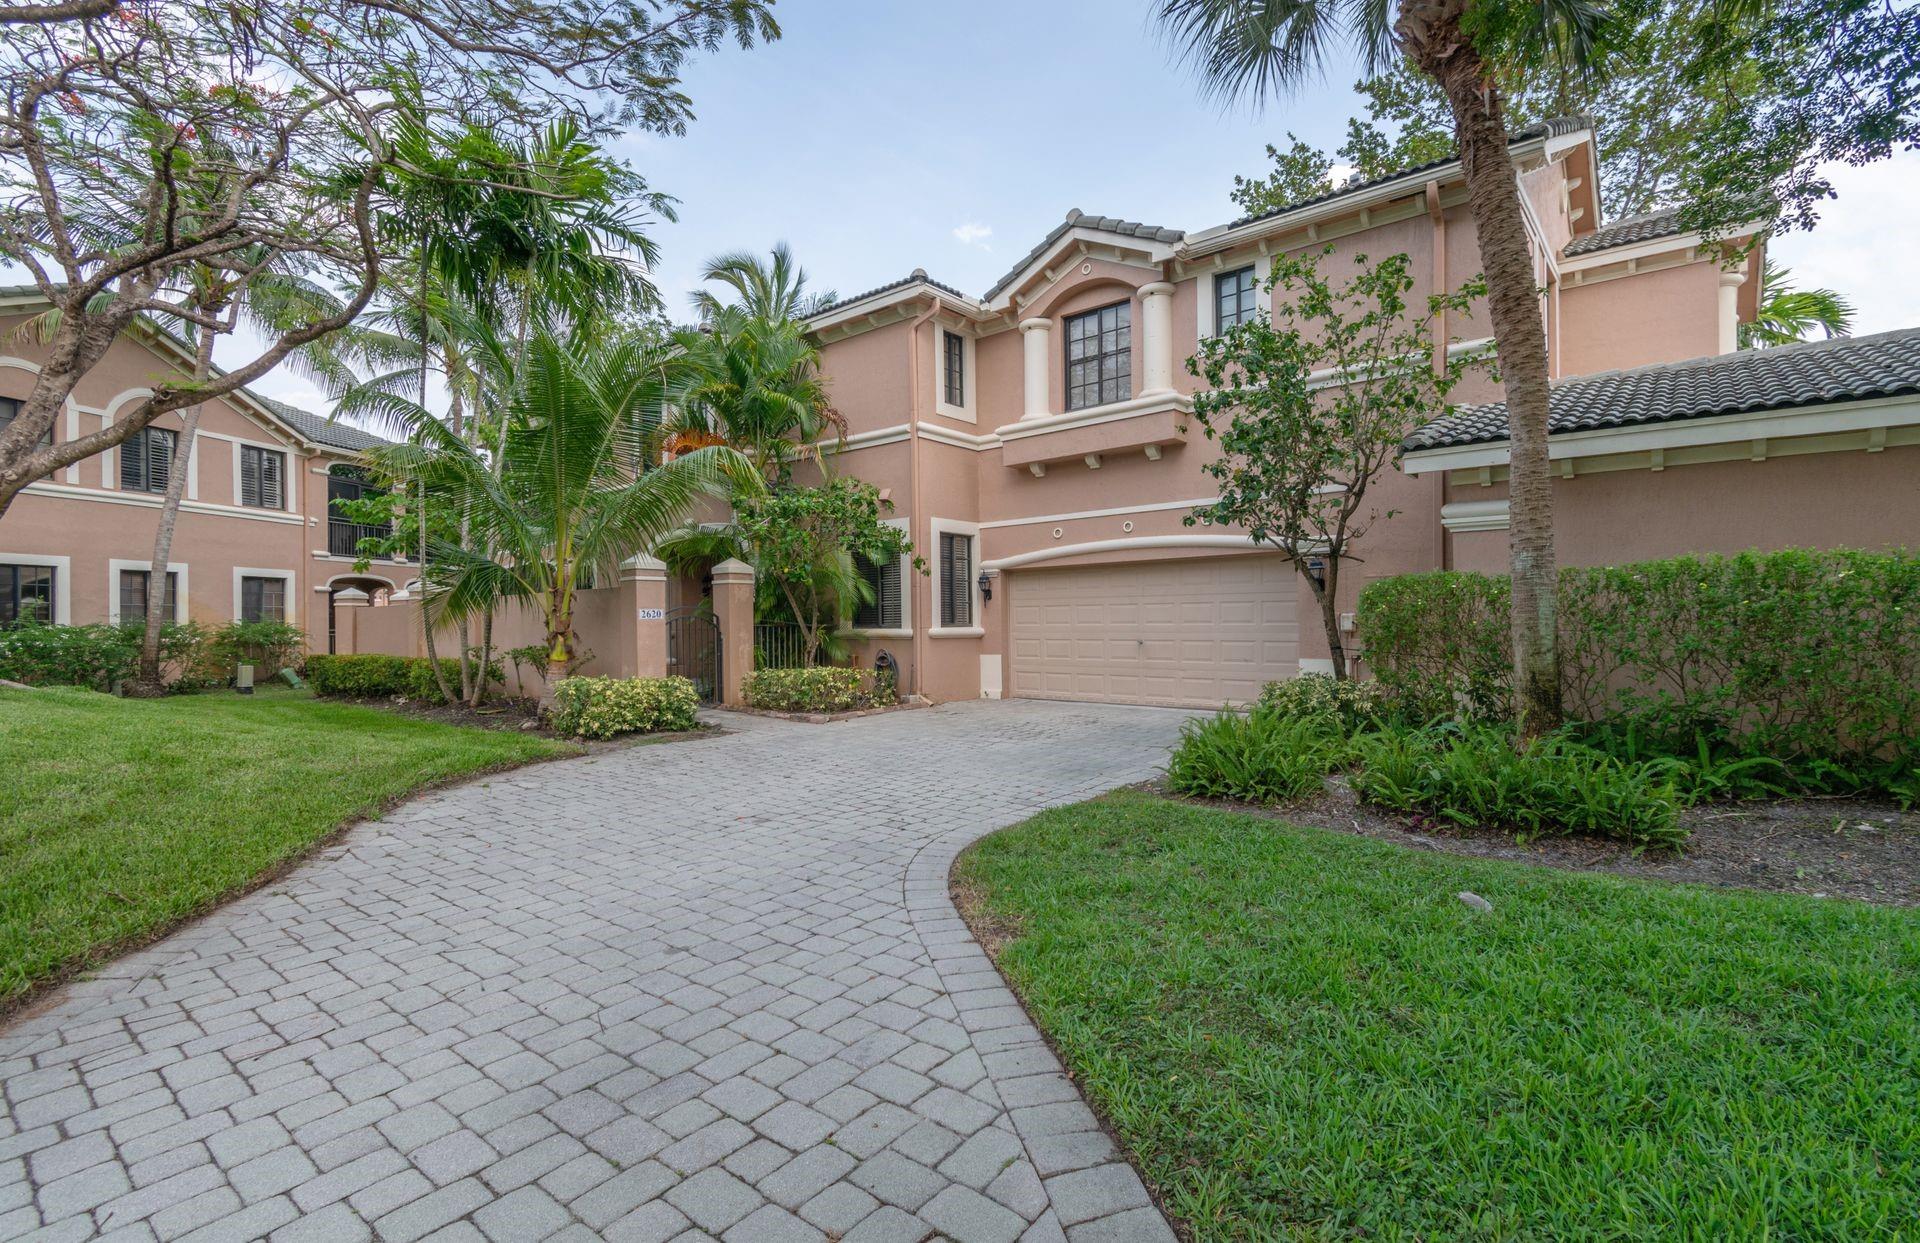 Beautiful condo in exclusive Weston Hills. 2 Bedrooms + Den with two full baths and 2 car garage. Tile floors in all living areas and laminate wood floors in bedrooms, covered patio!! Great location across from Weston Hills Country Club!*** A must-see!!!***